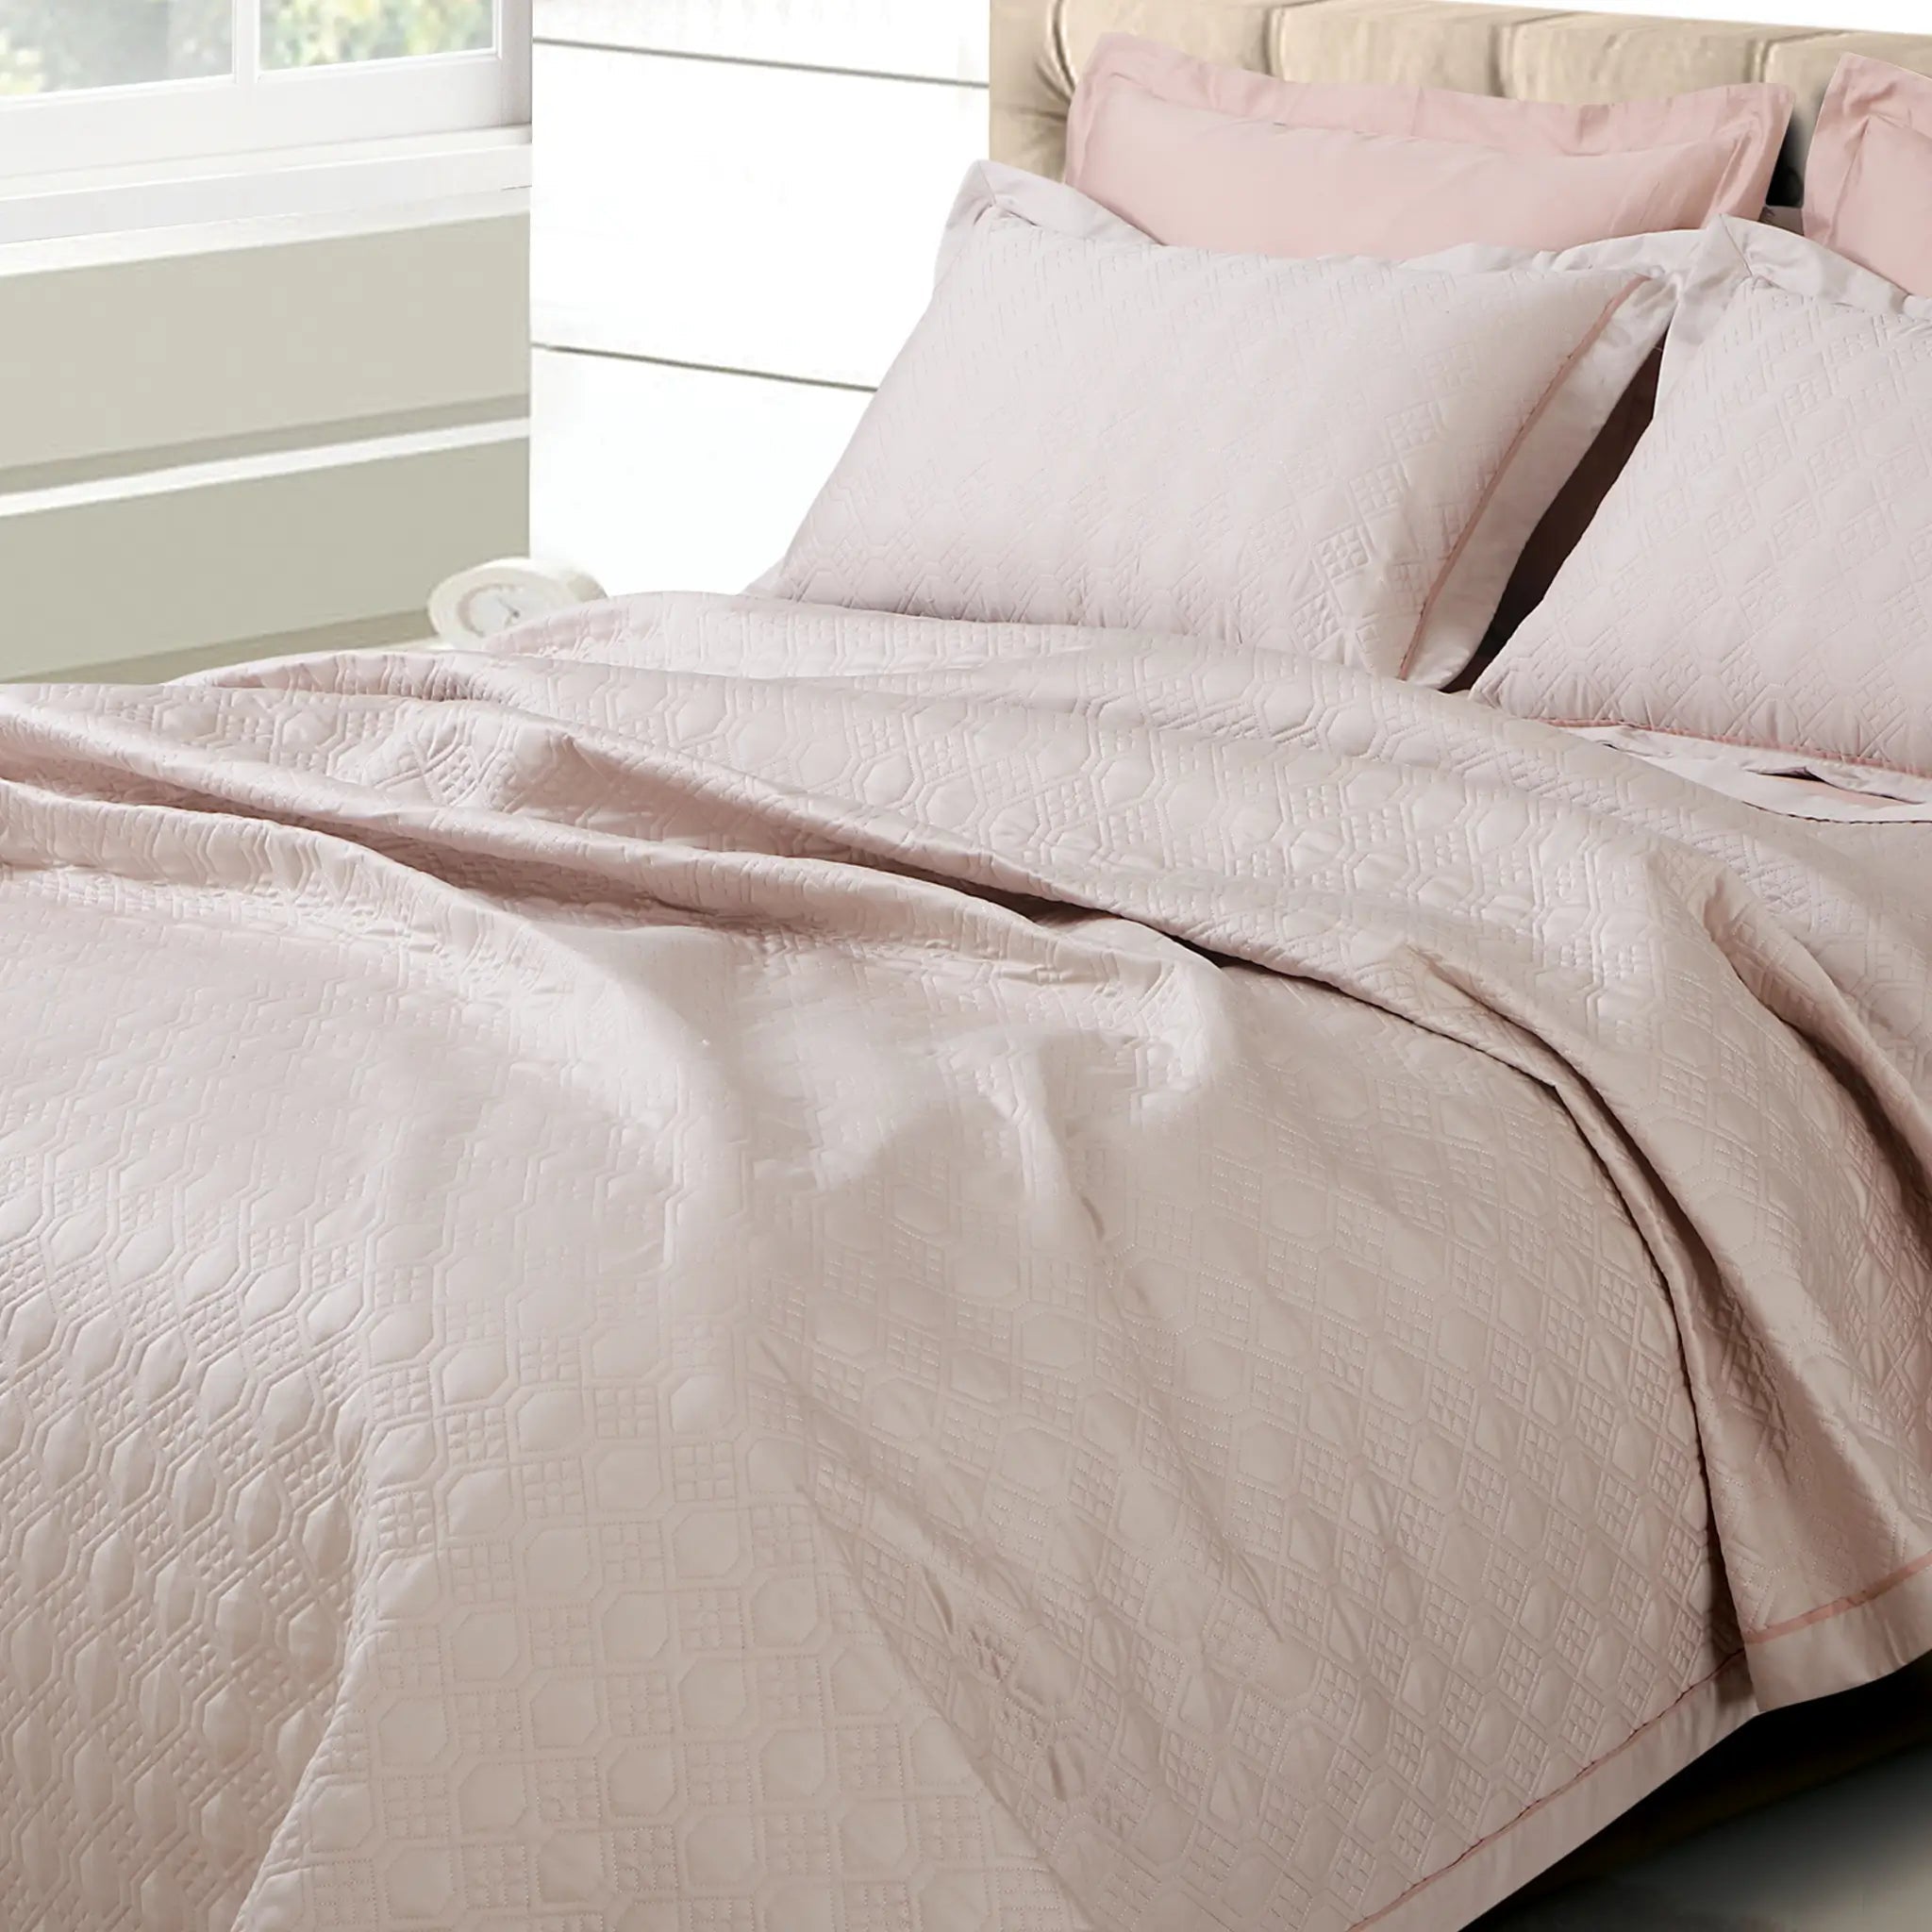 Malako Kairo 500 TC Almond Beige/Peach Solid King Size 100% Cotton Quilted Bed Cover/Embroidered Bed Sheet Set - MALAKO